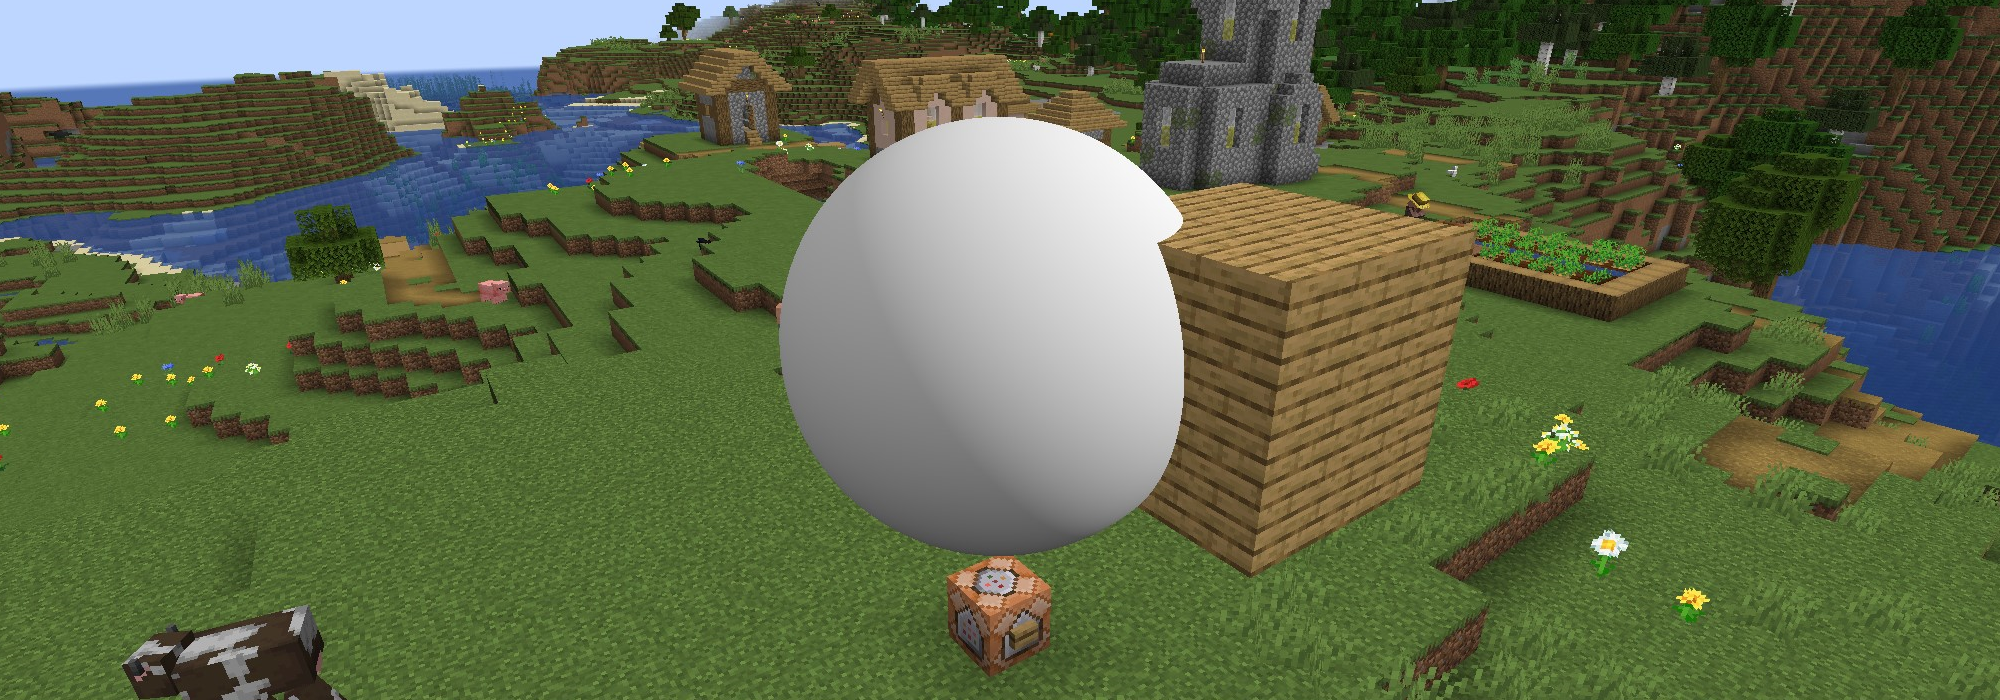 a Minecraft world with a sphere in the foreground